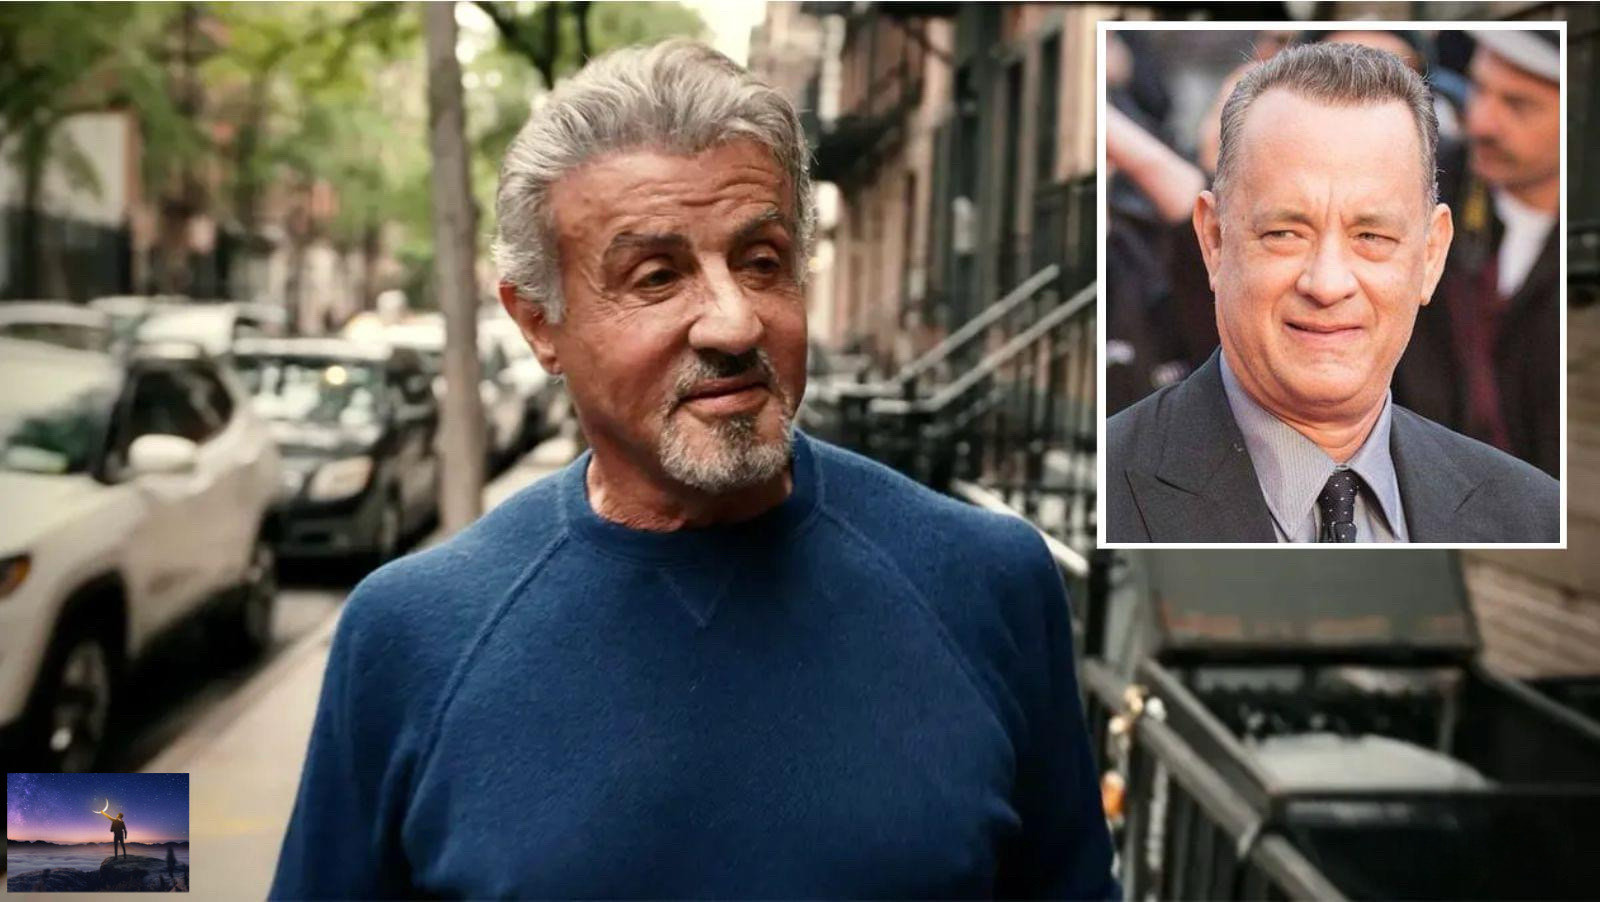 Sylvester Stallone Won’t Work With Tom Hanks: “He Weirds Me Out”